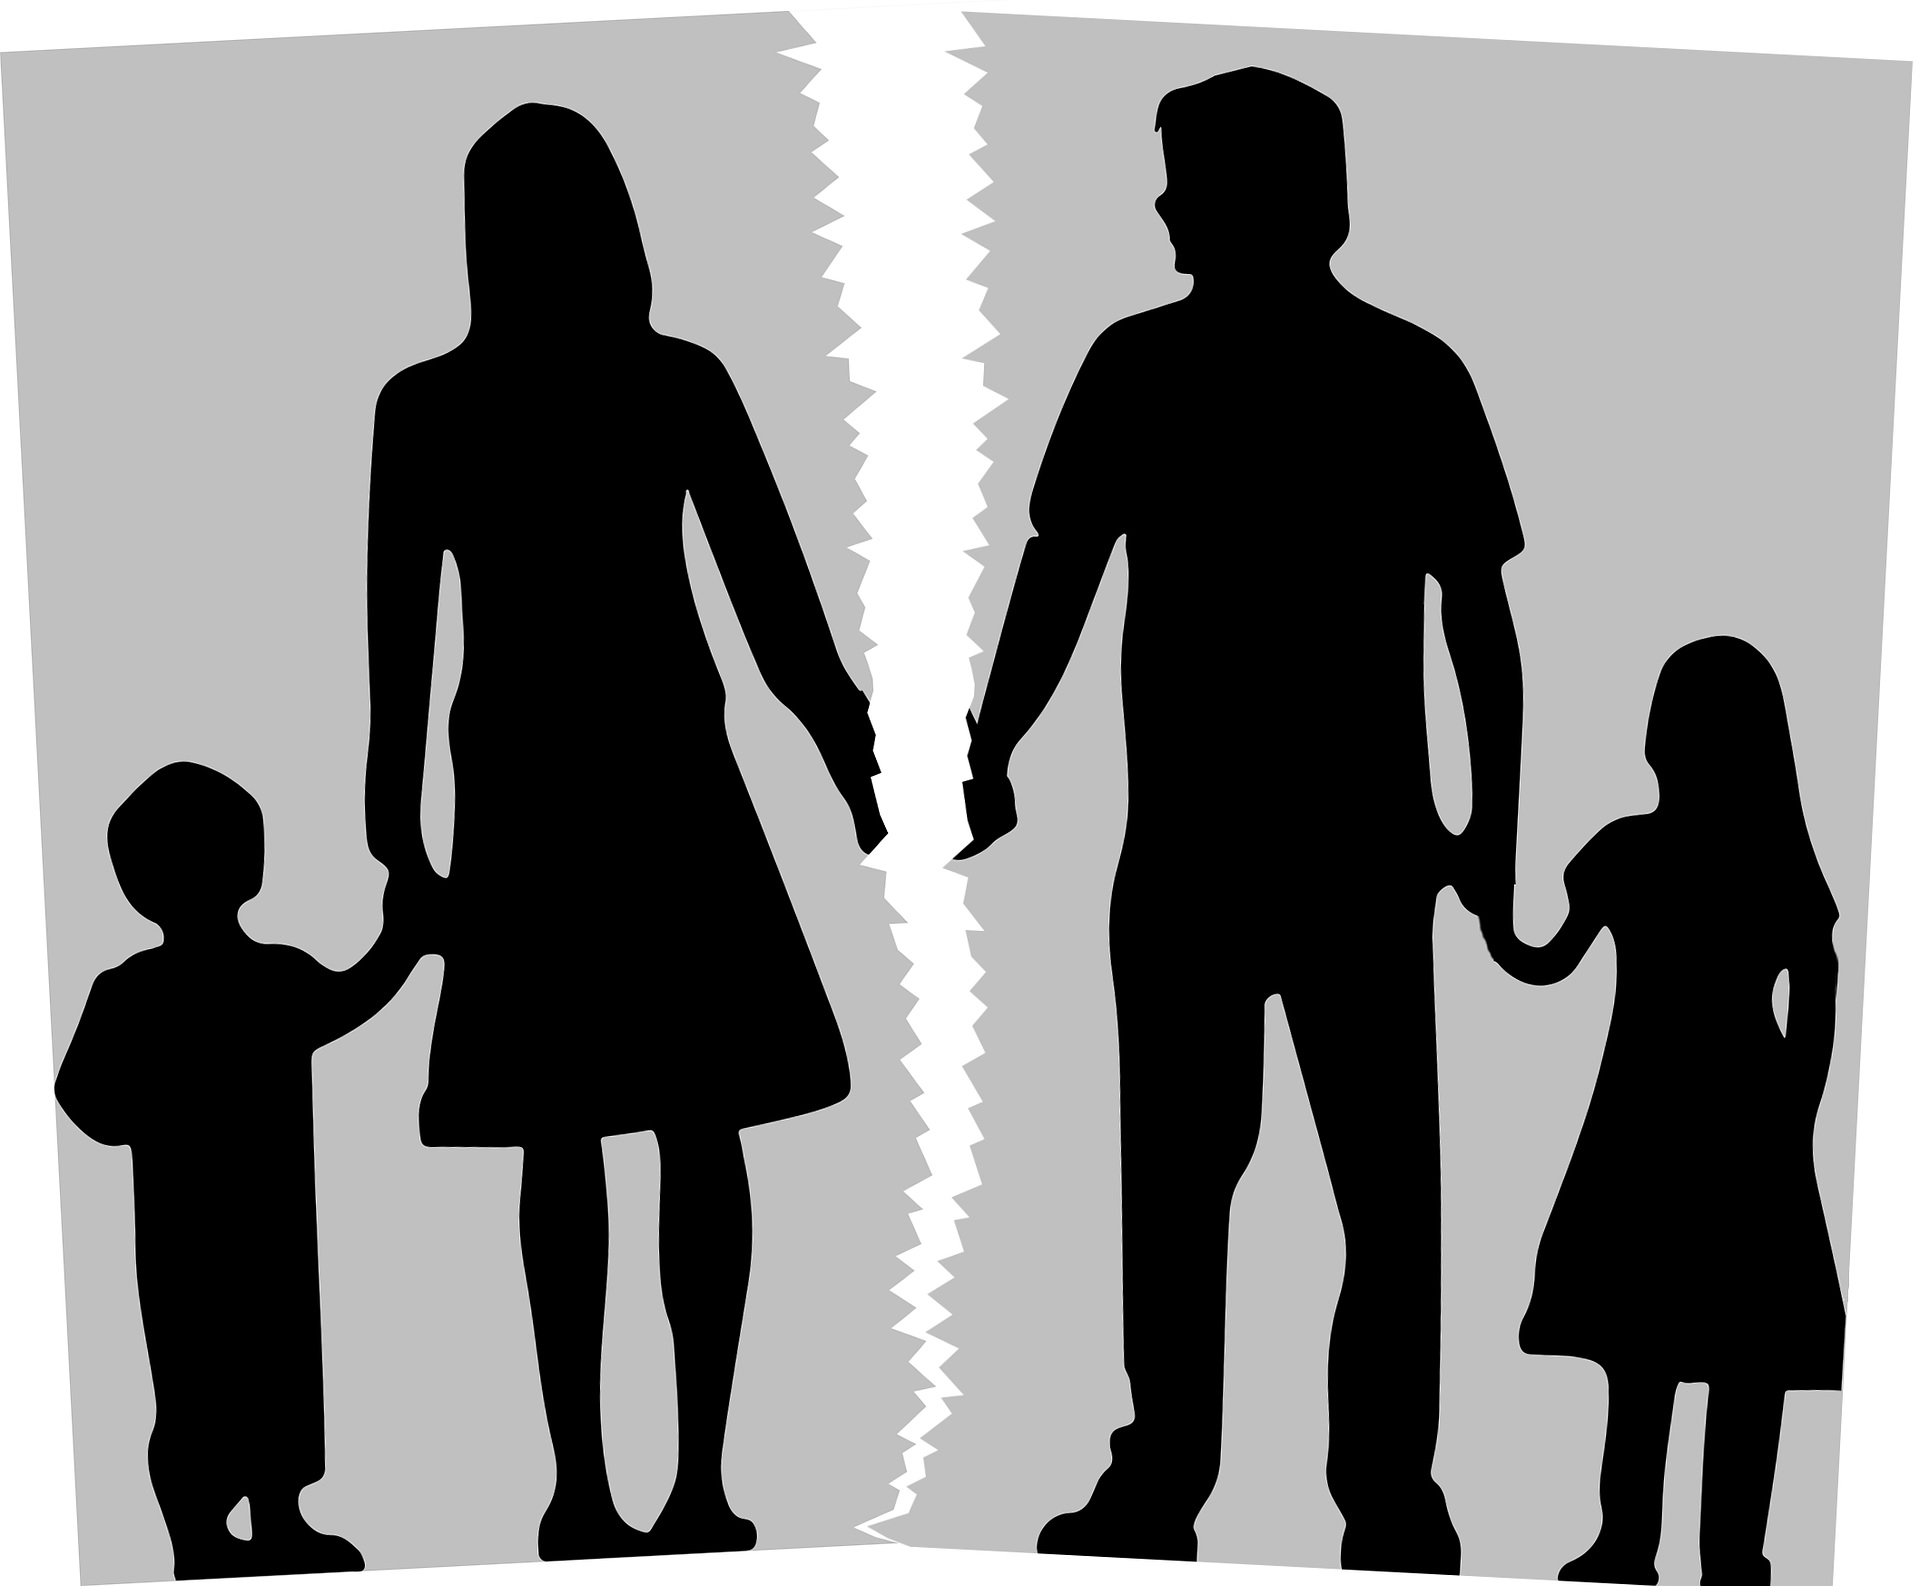 Difference Between Joint Legal and Joint Physical Child Custody in Massachusetts